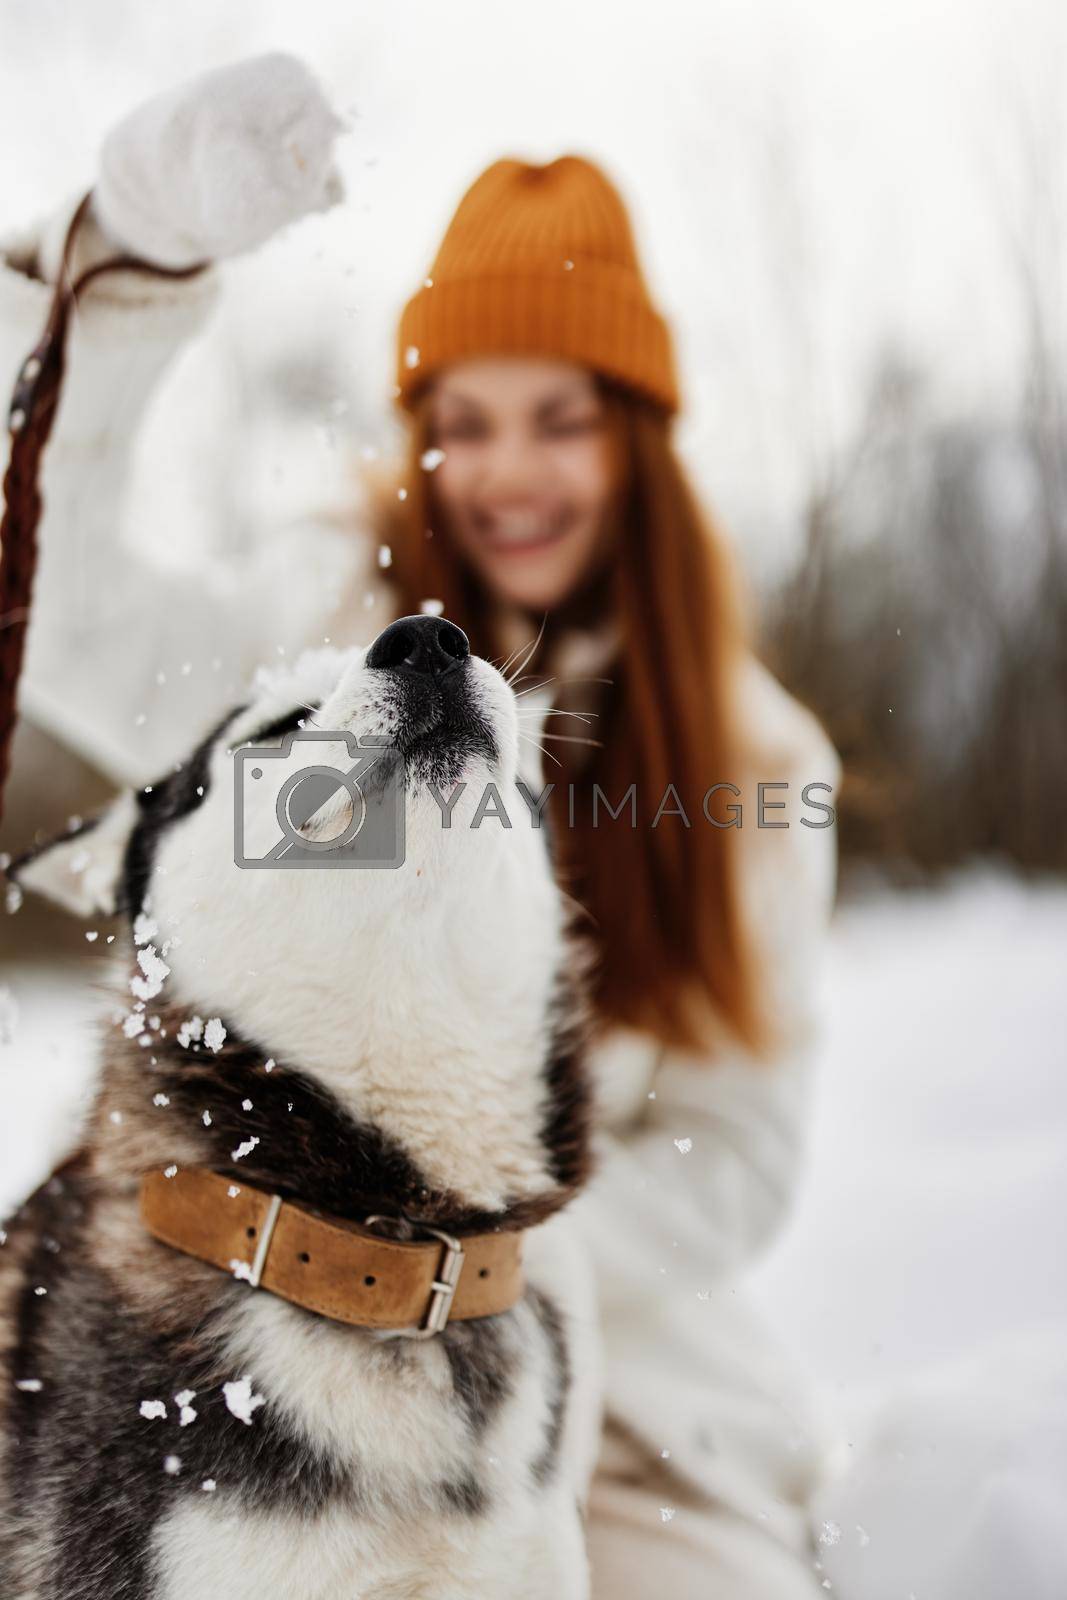 woman with dog outdoor games snow fun travel Lifestyle. High quality photo